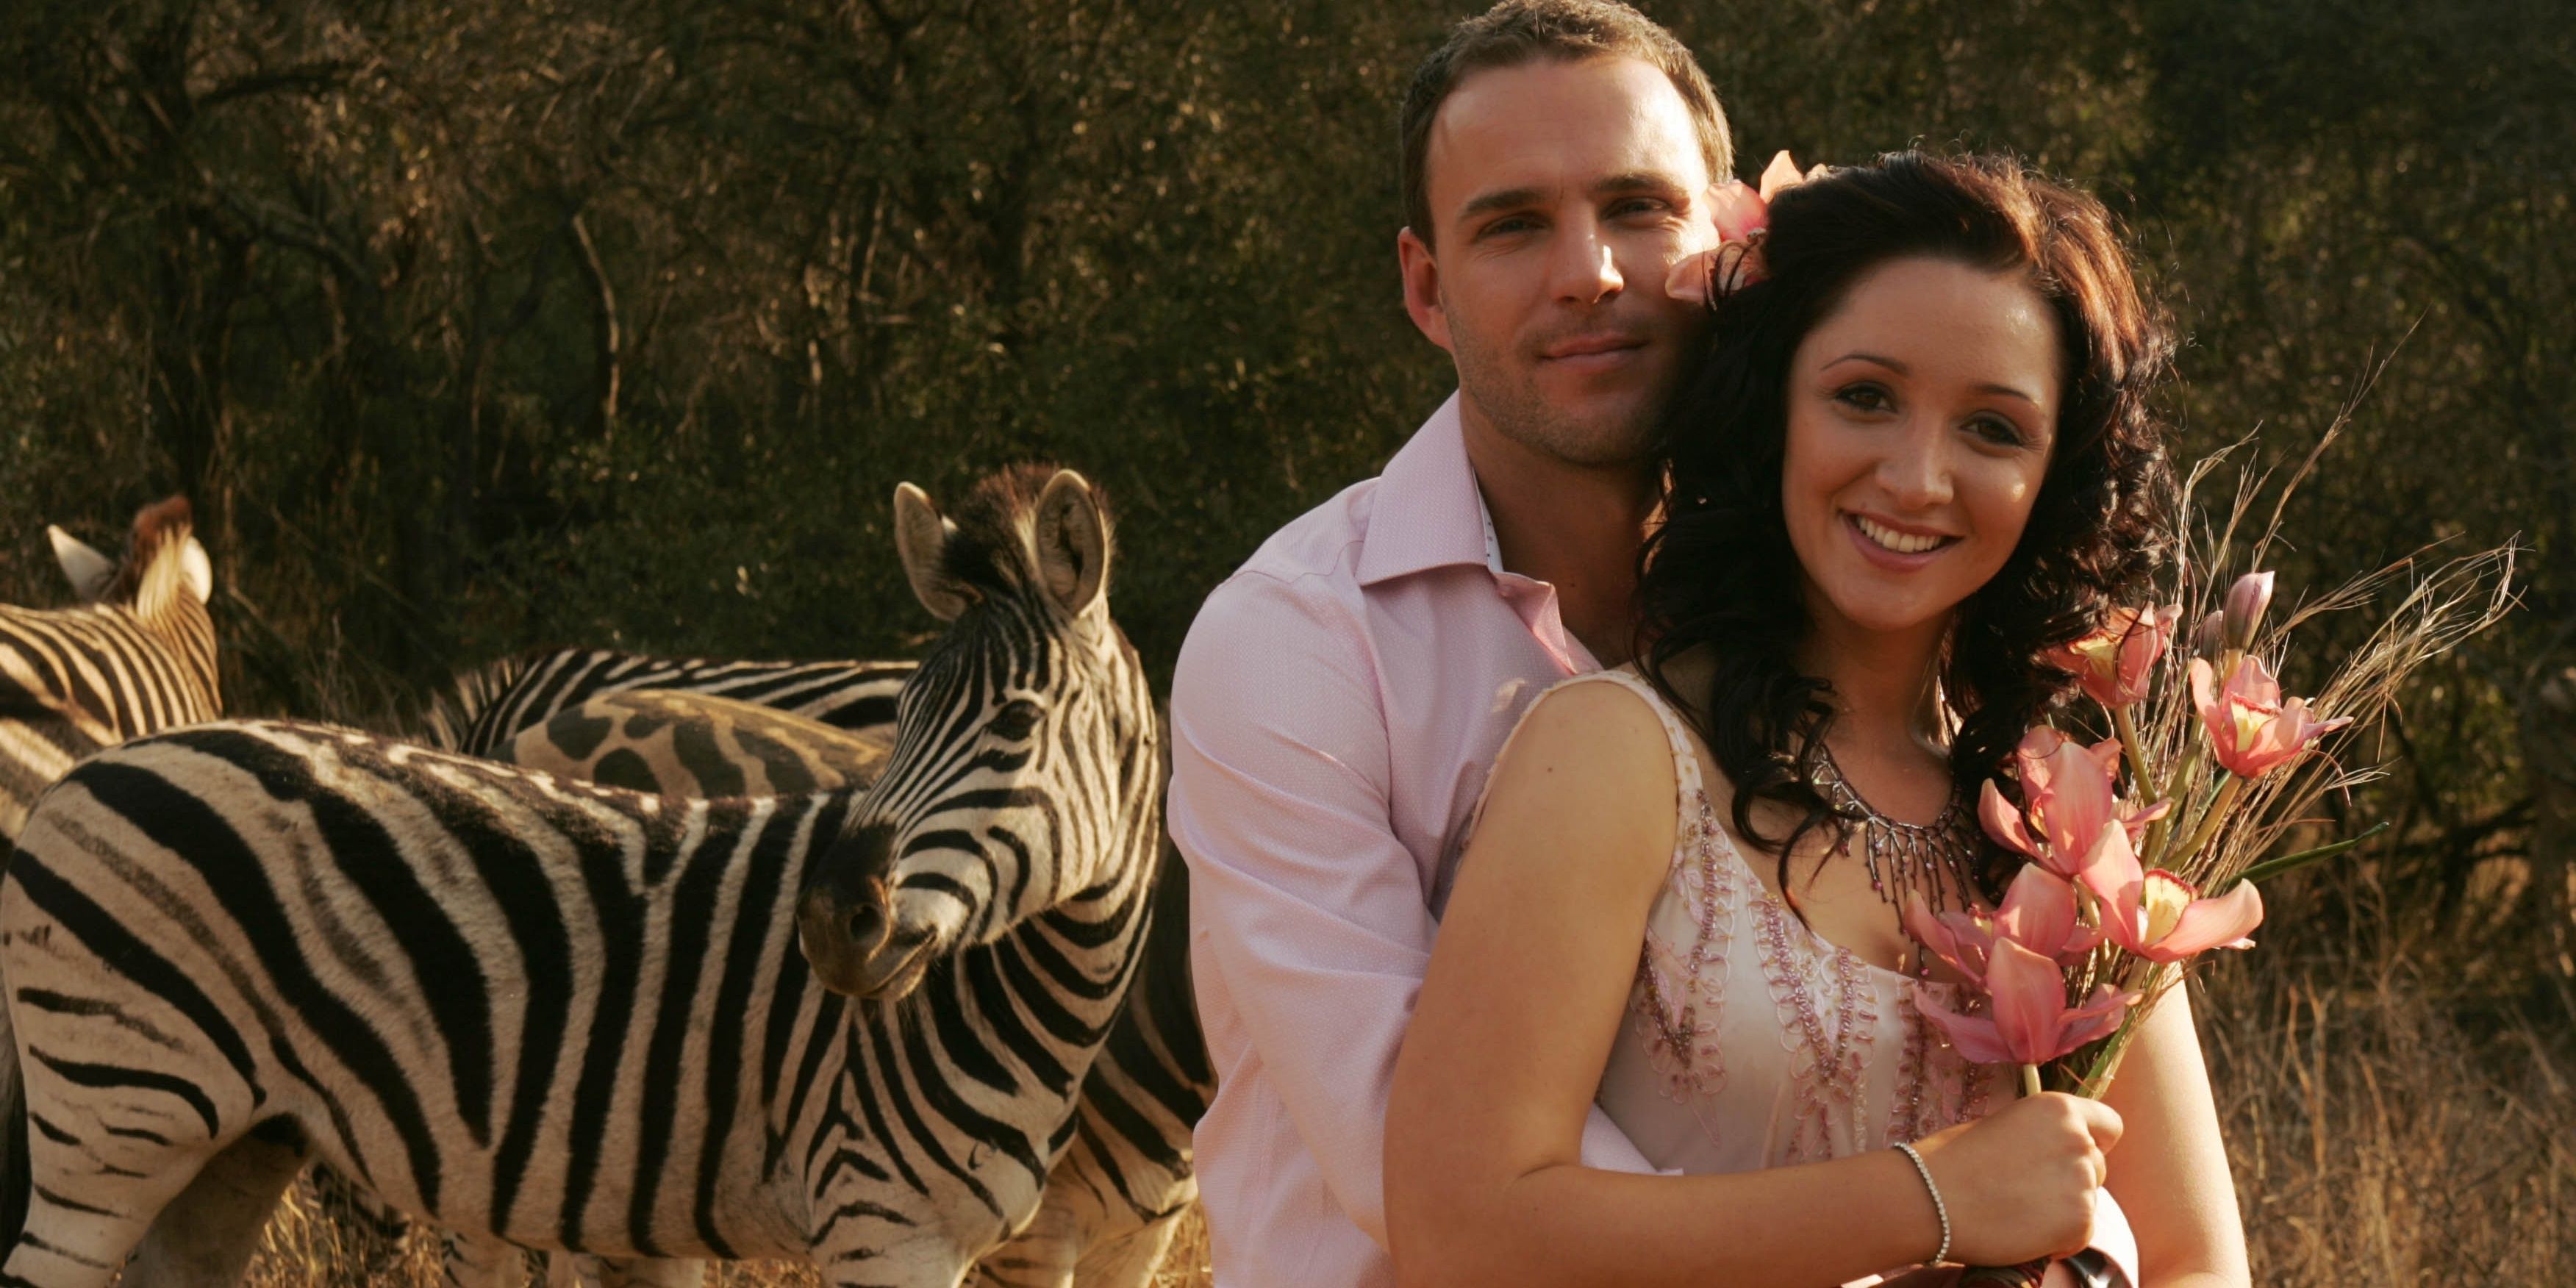 Zebras and a couple holding flowers in the Wild at Heart remake, Life Is Wild